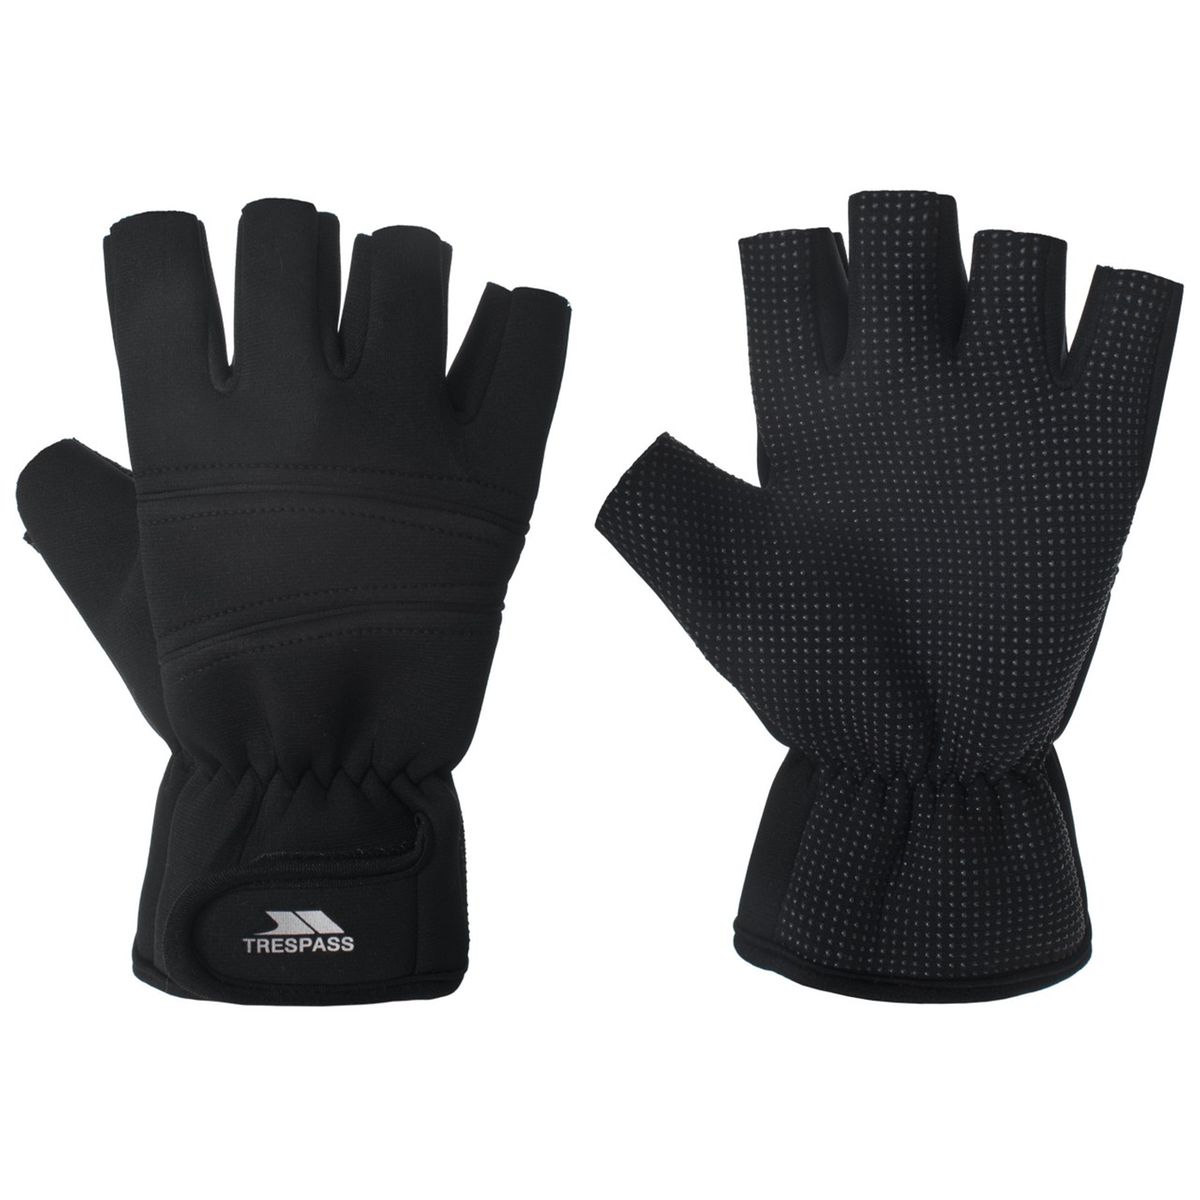 Highlander Homme Mitaines Gants Thinsulate Doublure Thermique Noir Small 